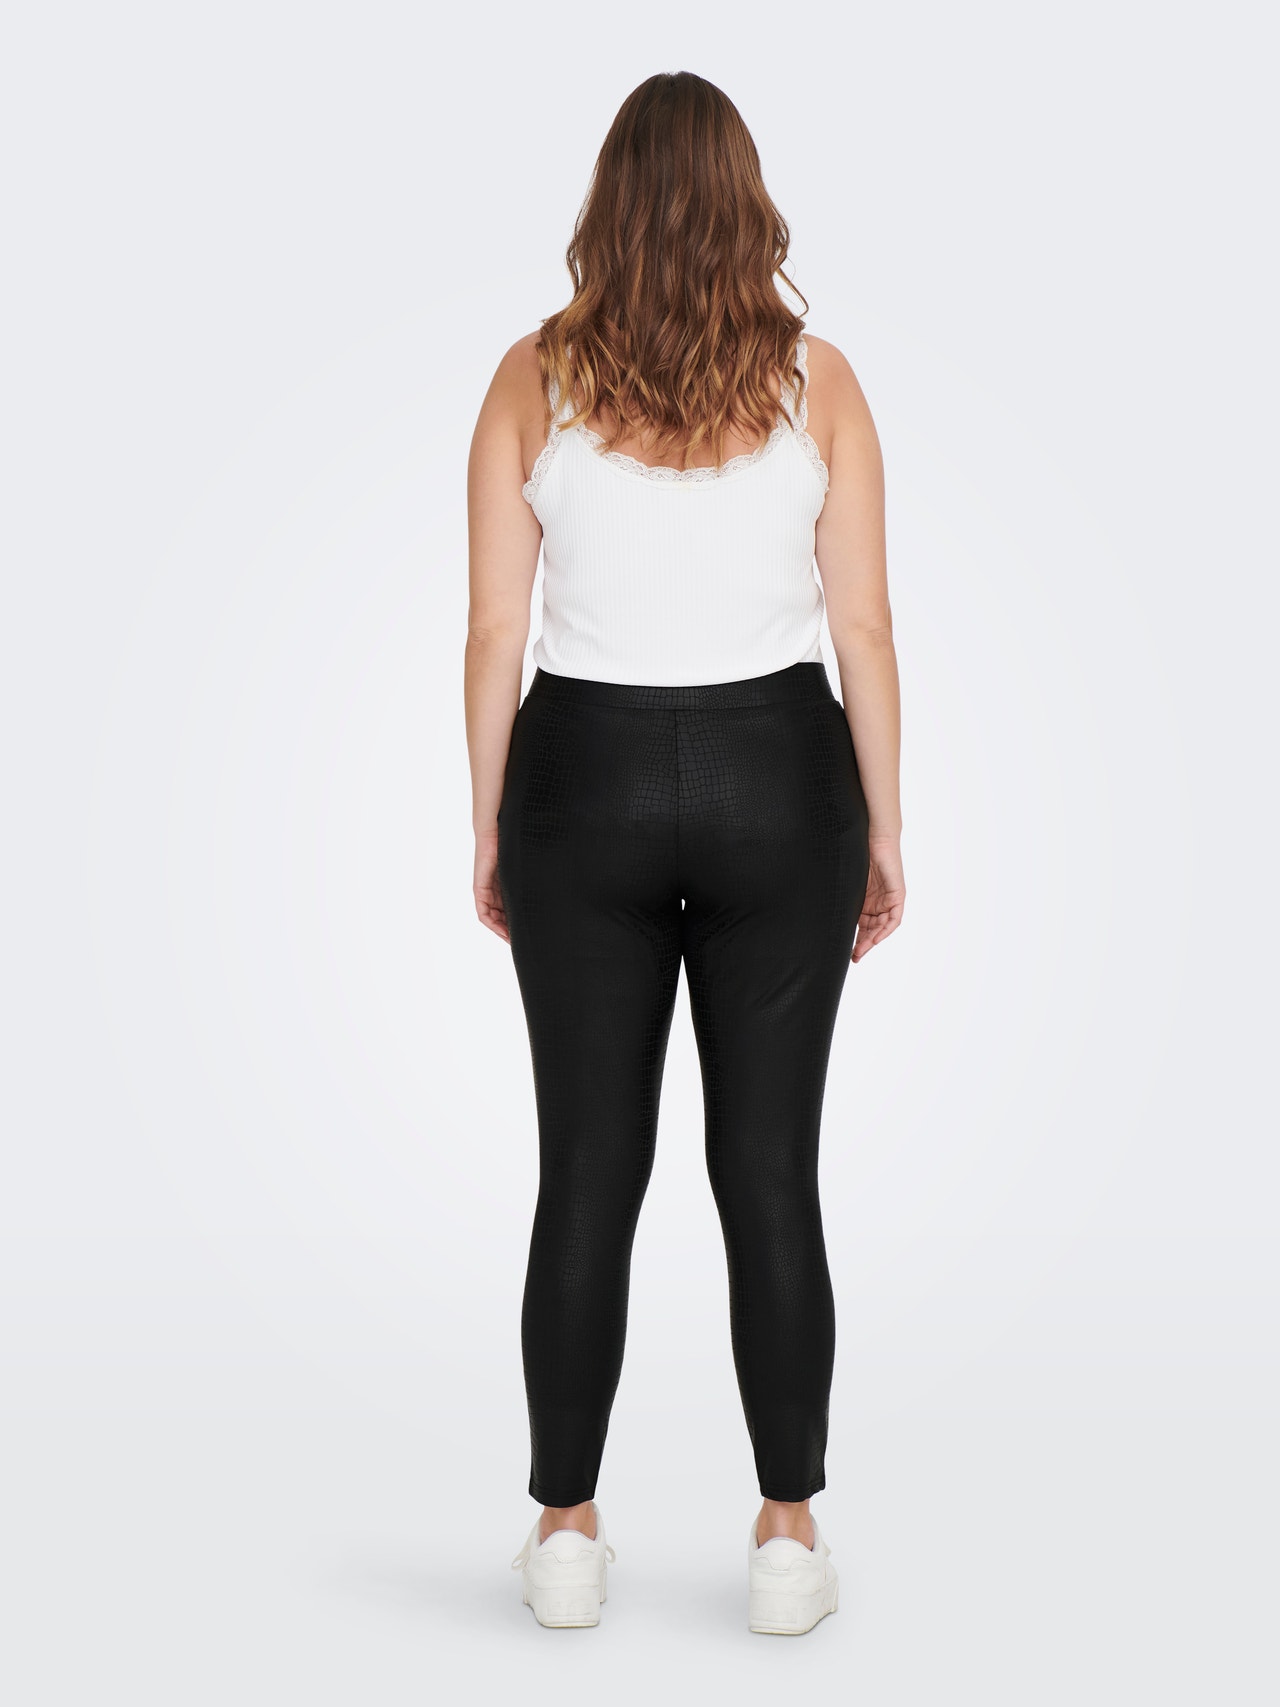 Curvy coated leggings with 20% discount!